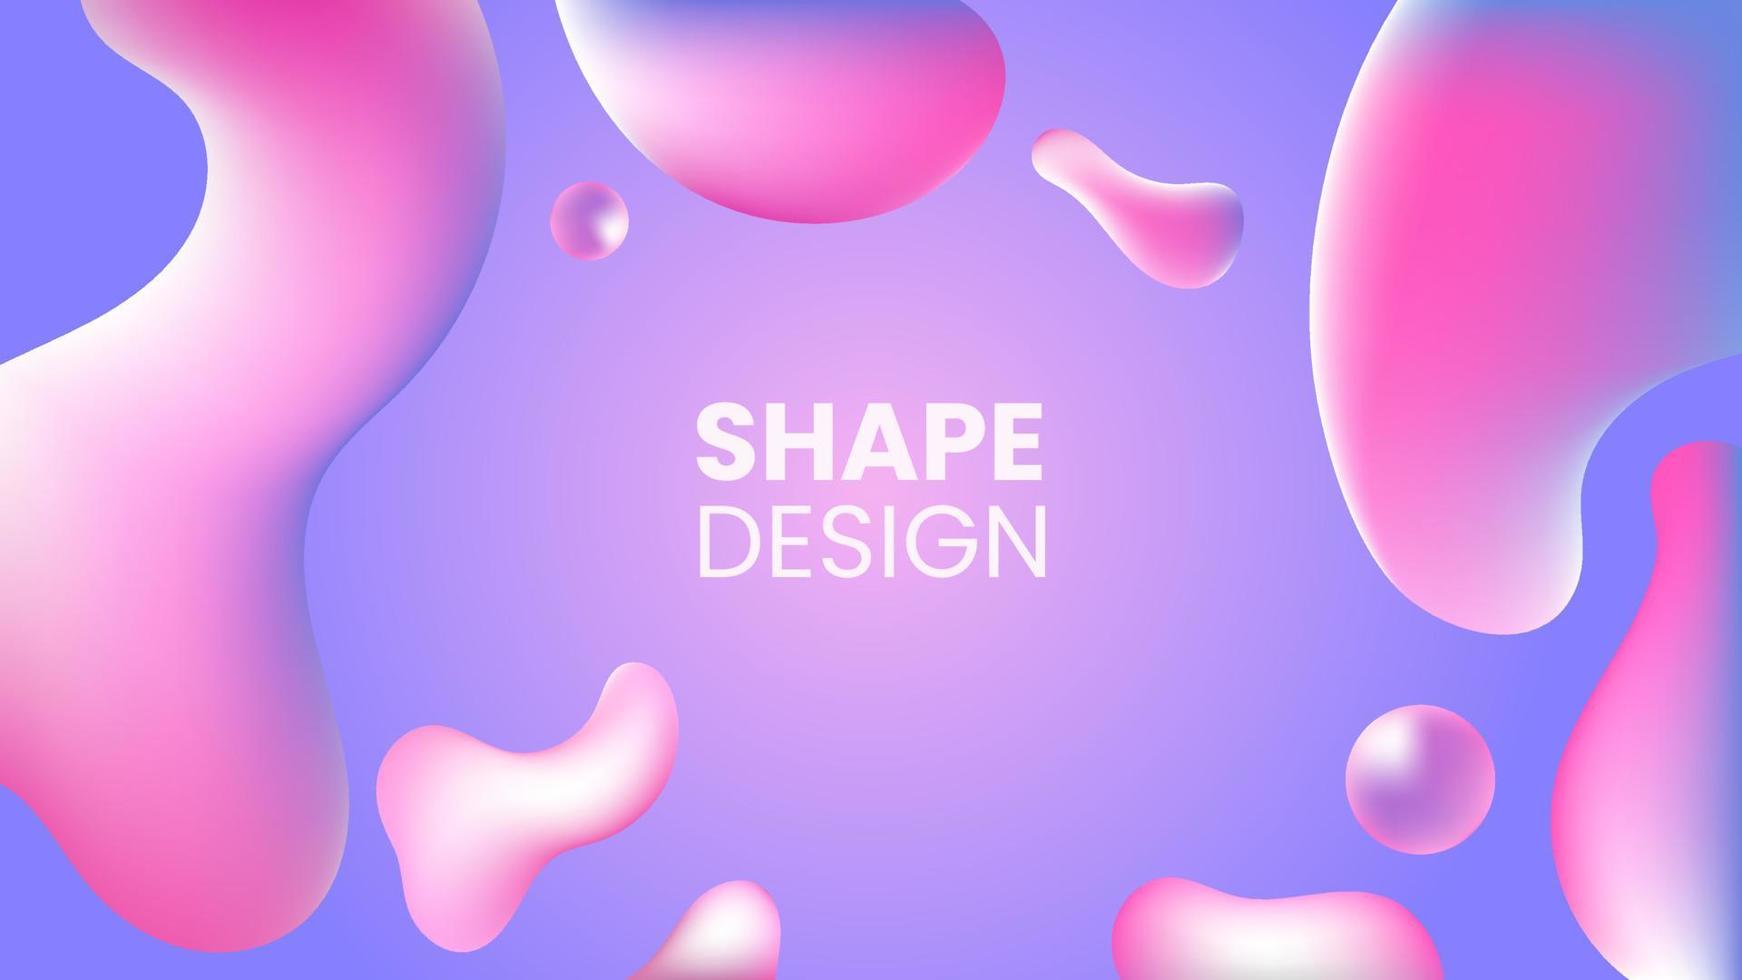 Liquid flow purple, pink 3D neon lava lamp vector geometric background for banner, card, UI design or wallpaper. Gradient mesh bubble in the shape of a wave drop. Fluid colorful abstract shapes.